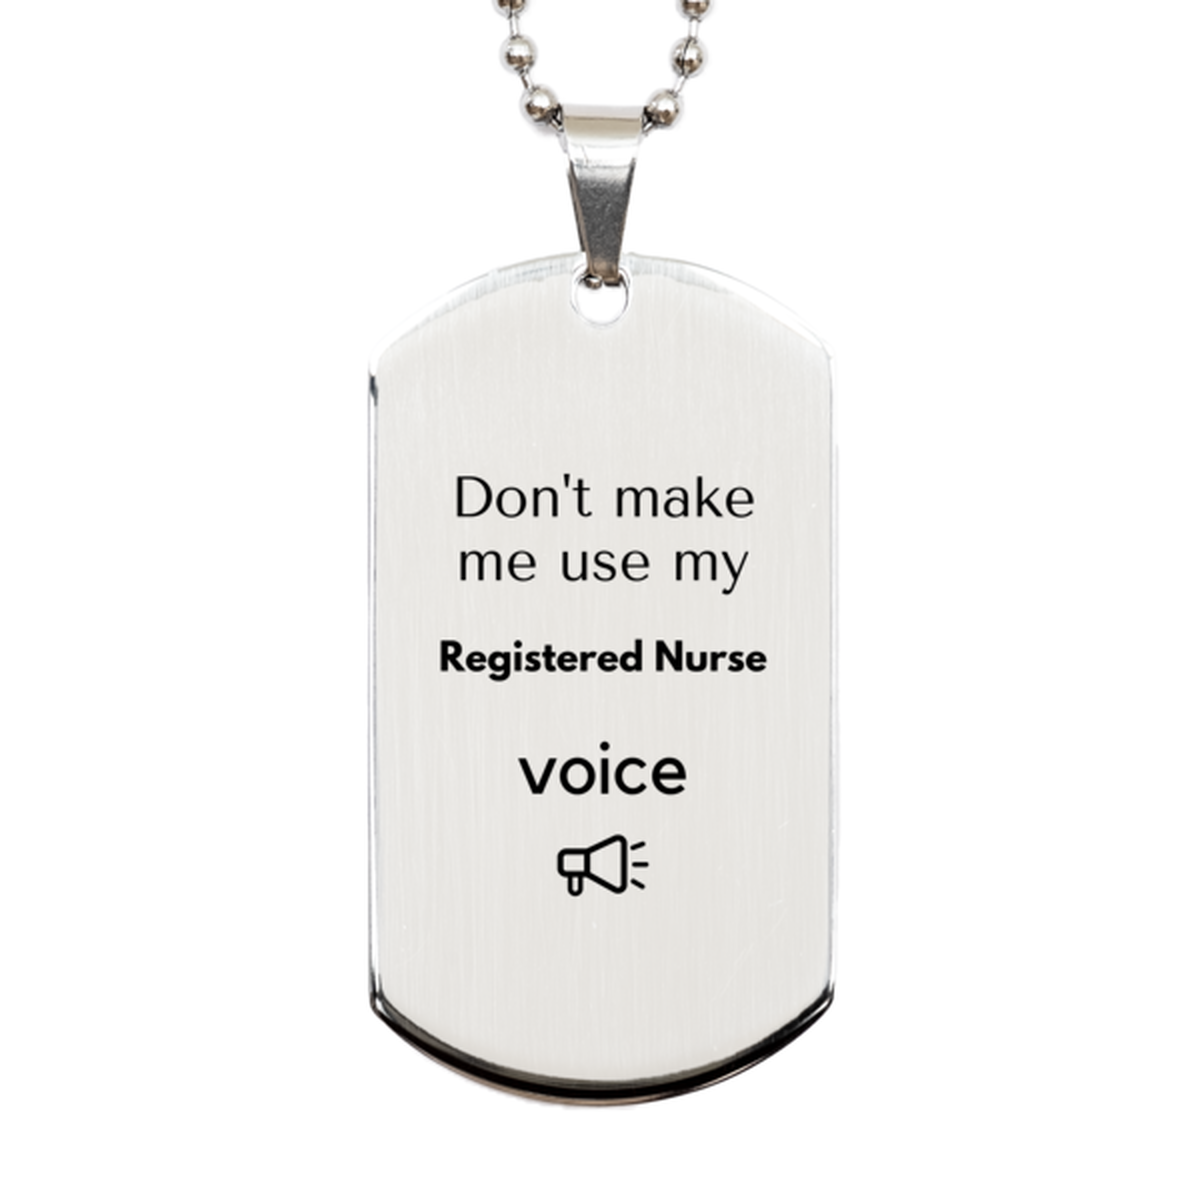 Don't make me use my Registered Nurse voice, Sarcasm Registered Nurse Gifts, Christmas Registered Nurse Silver Dog Tag Birthday Unique Gifts For Registered Nurse Coworkers, Men, Women, Colleague, Friends